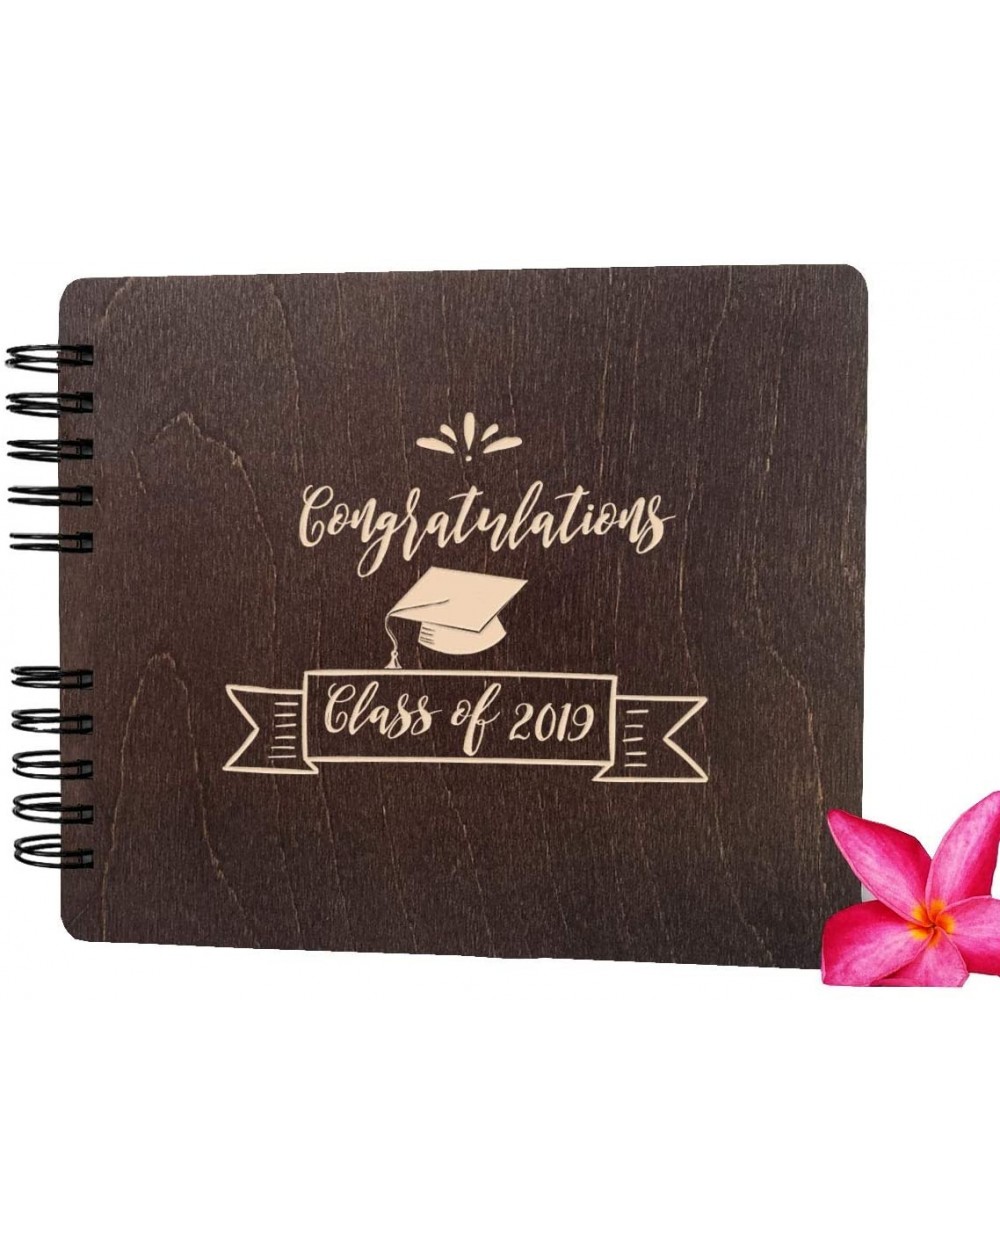 Guestbooks Graduation Wood Guest Book Made in USA Rustic Grad Gifts Photo Album Party Supplies Decorations Instant Photo Gues...